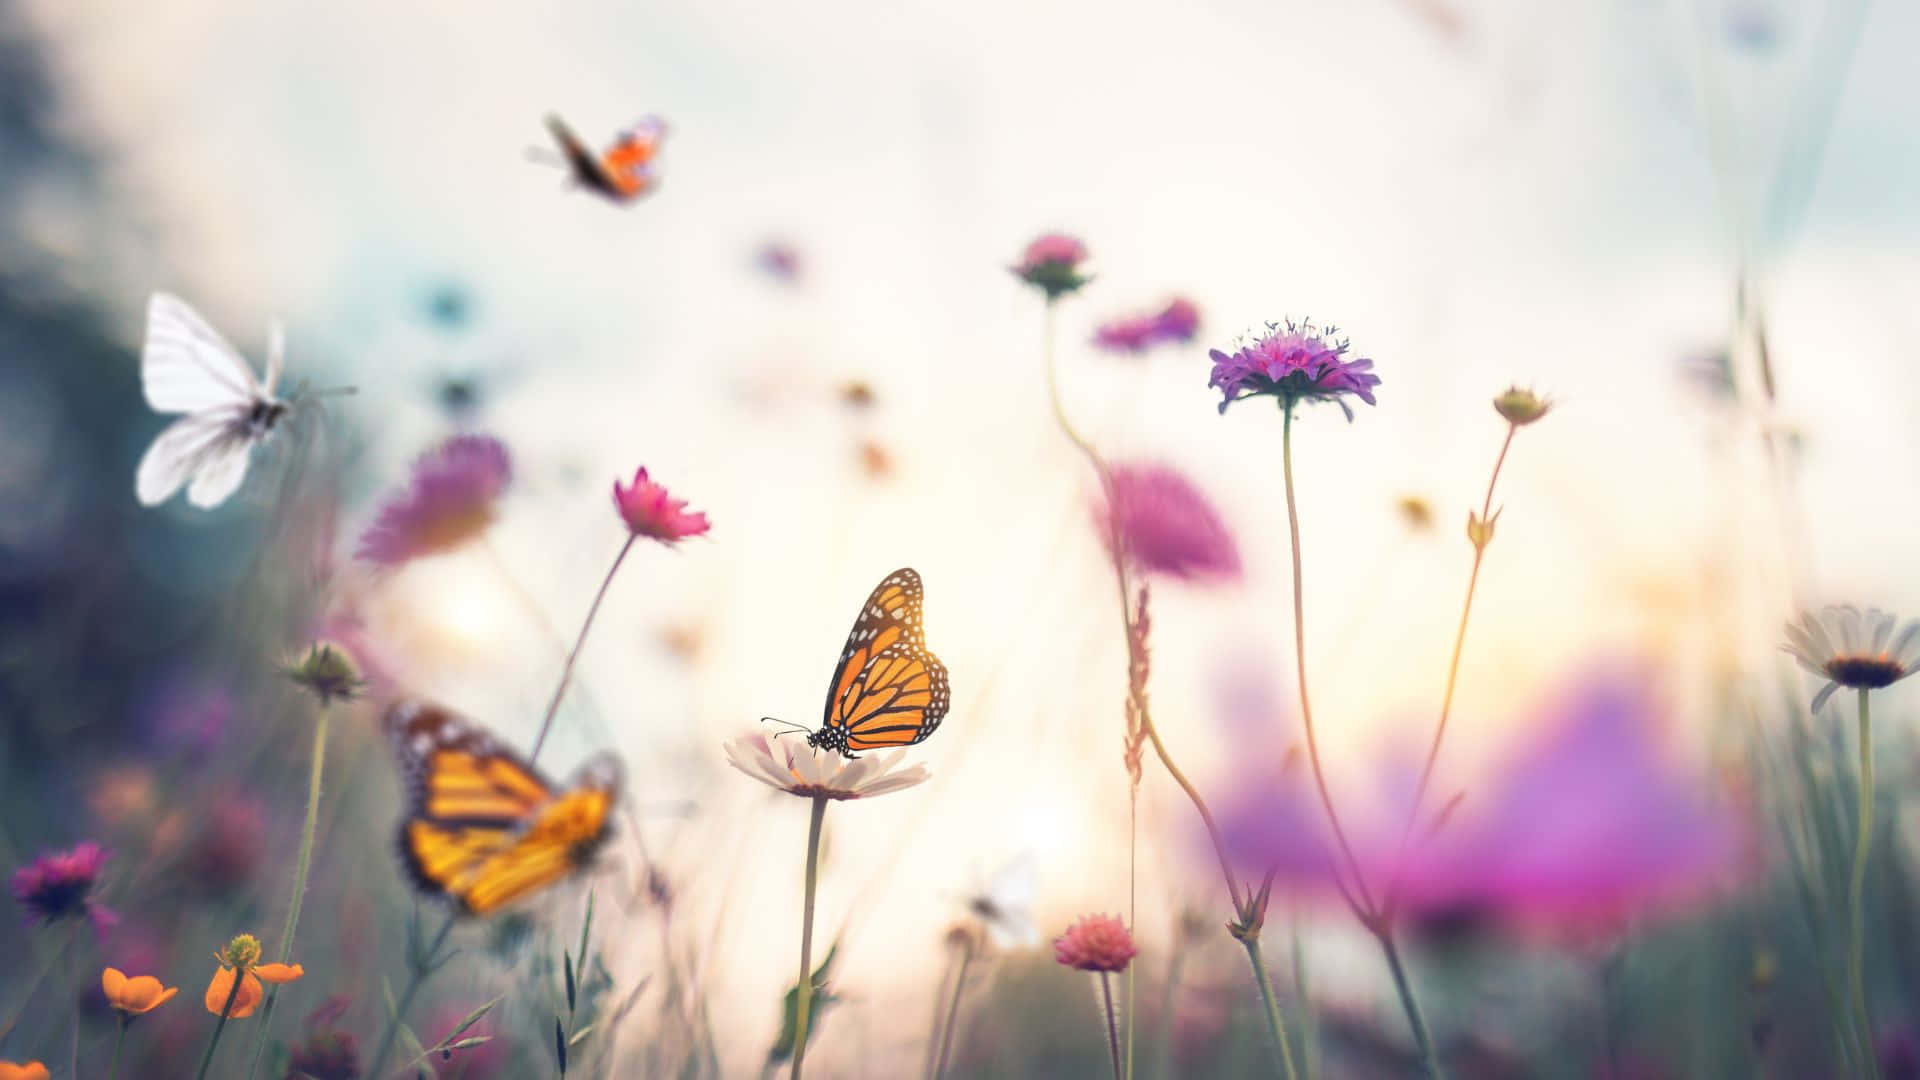 Butterfly Aesthetic HD Wallpaper, Free Butterfly Aesthetic Wallpaper Image For All Devices